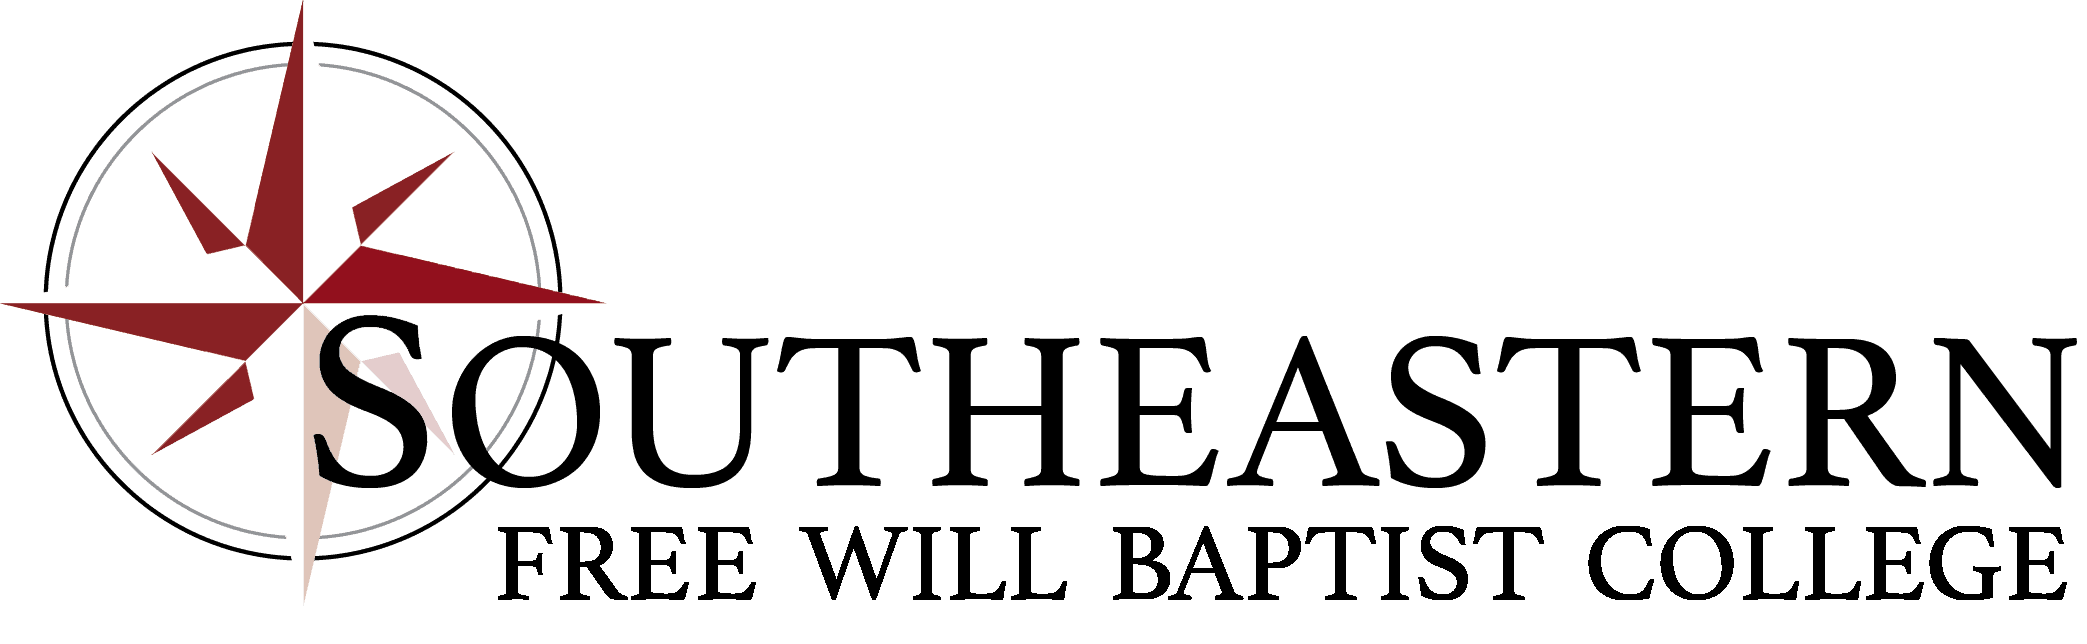 Southeastern Free Will Baptist College